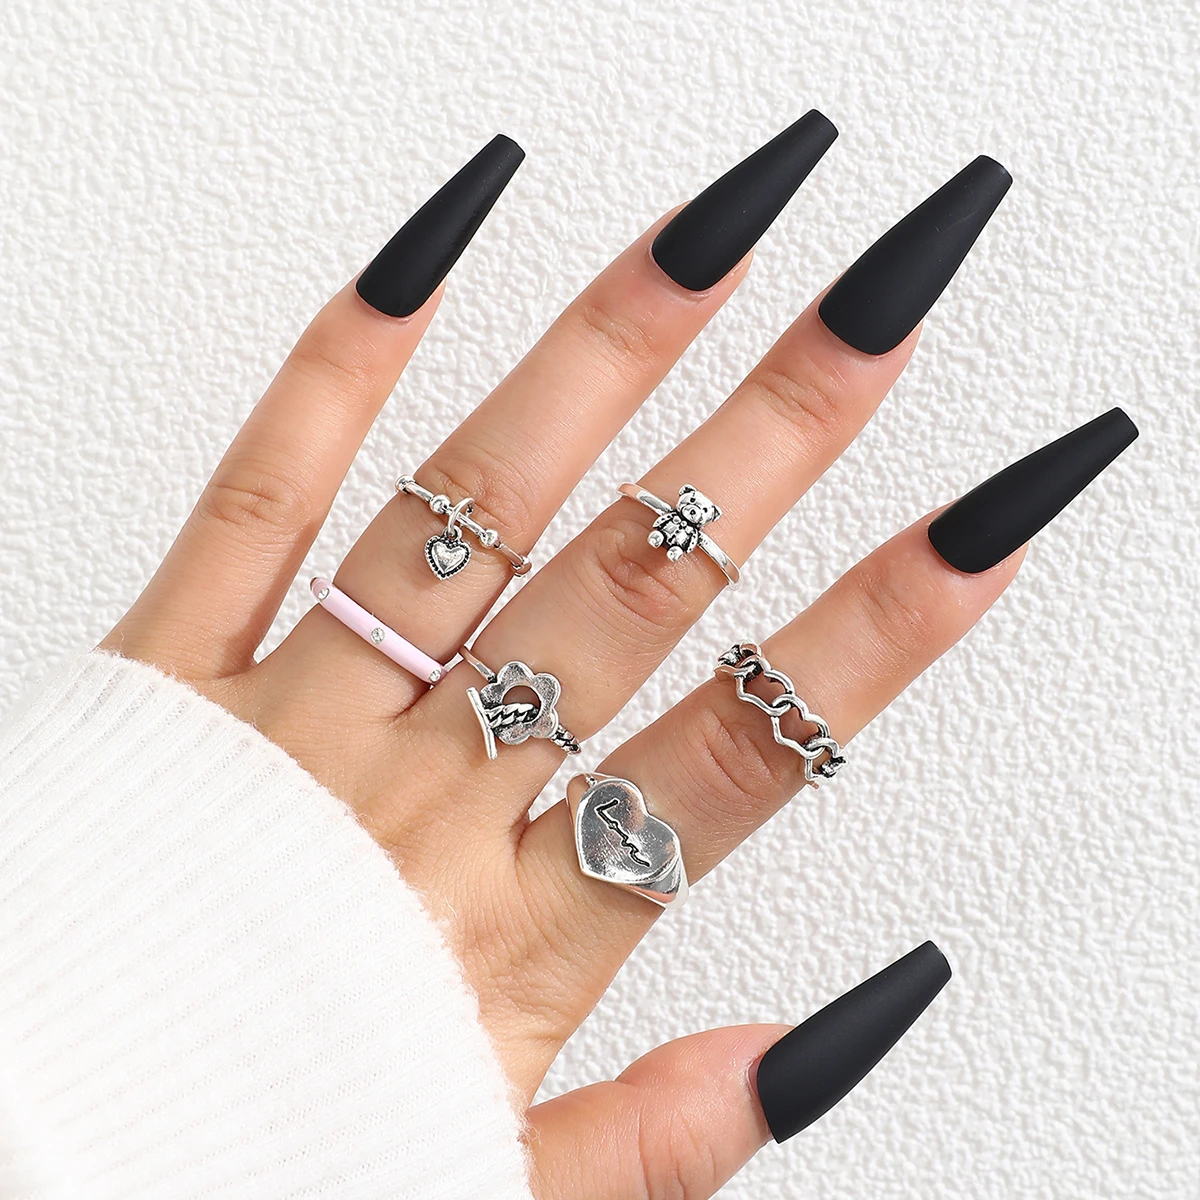 

Aprilwell 6 Pcs Vintage Heart Rings Set for Women Silver Color Gothic Bear OT Buckle Kpop Stranger Things Anillos Jewelry Gifts